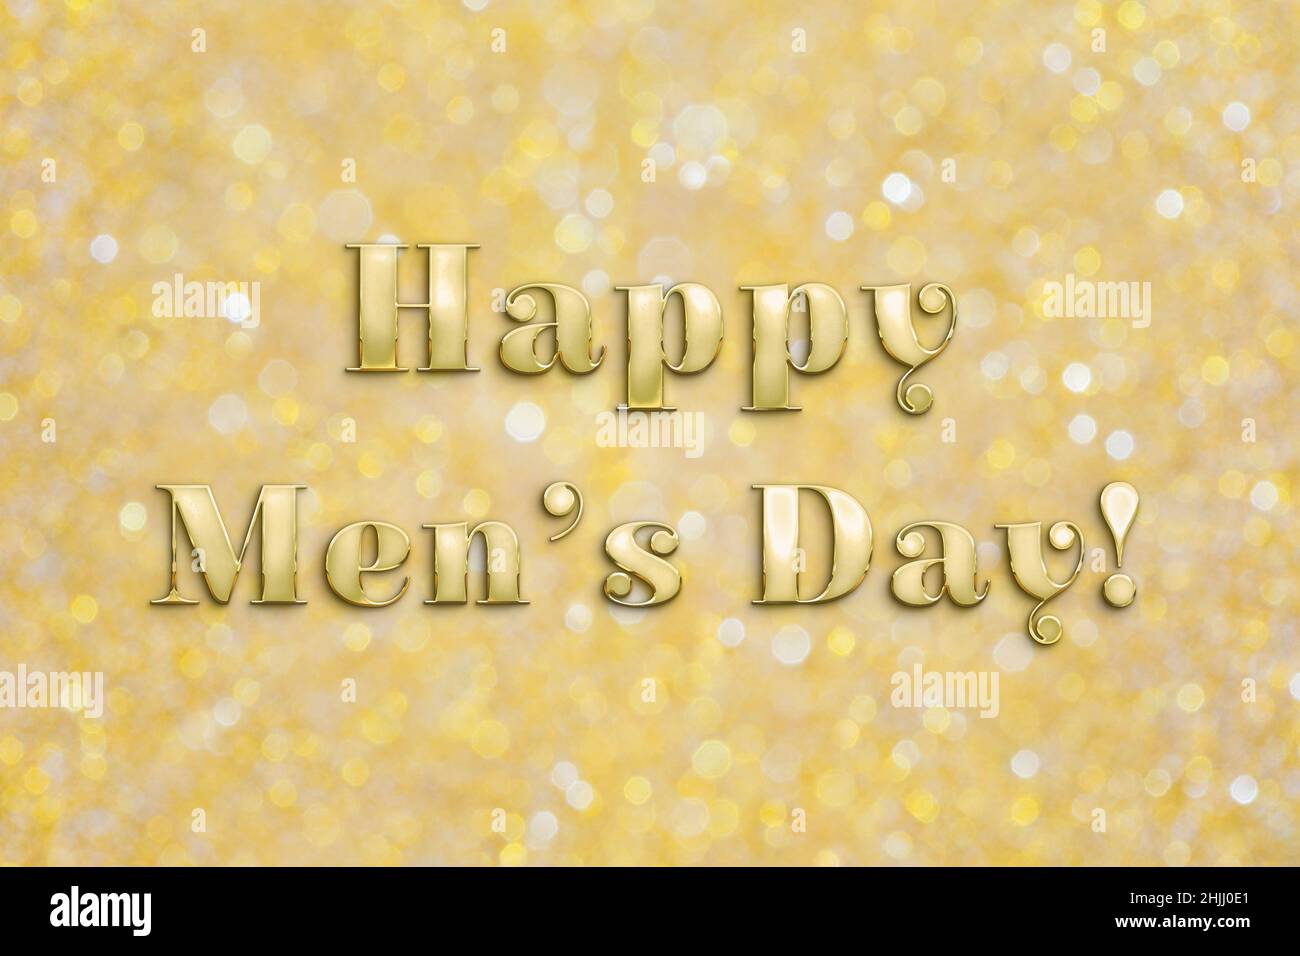 'Happy Men's Day' text in golden letters over shiny gold colored blurred bokeh glitter background. Stock Photo